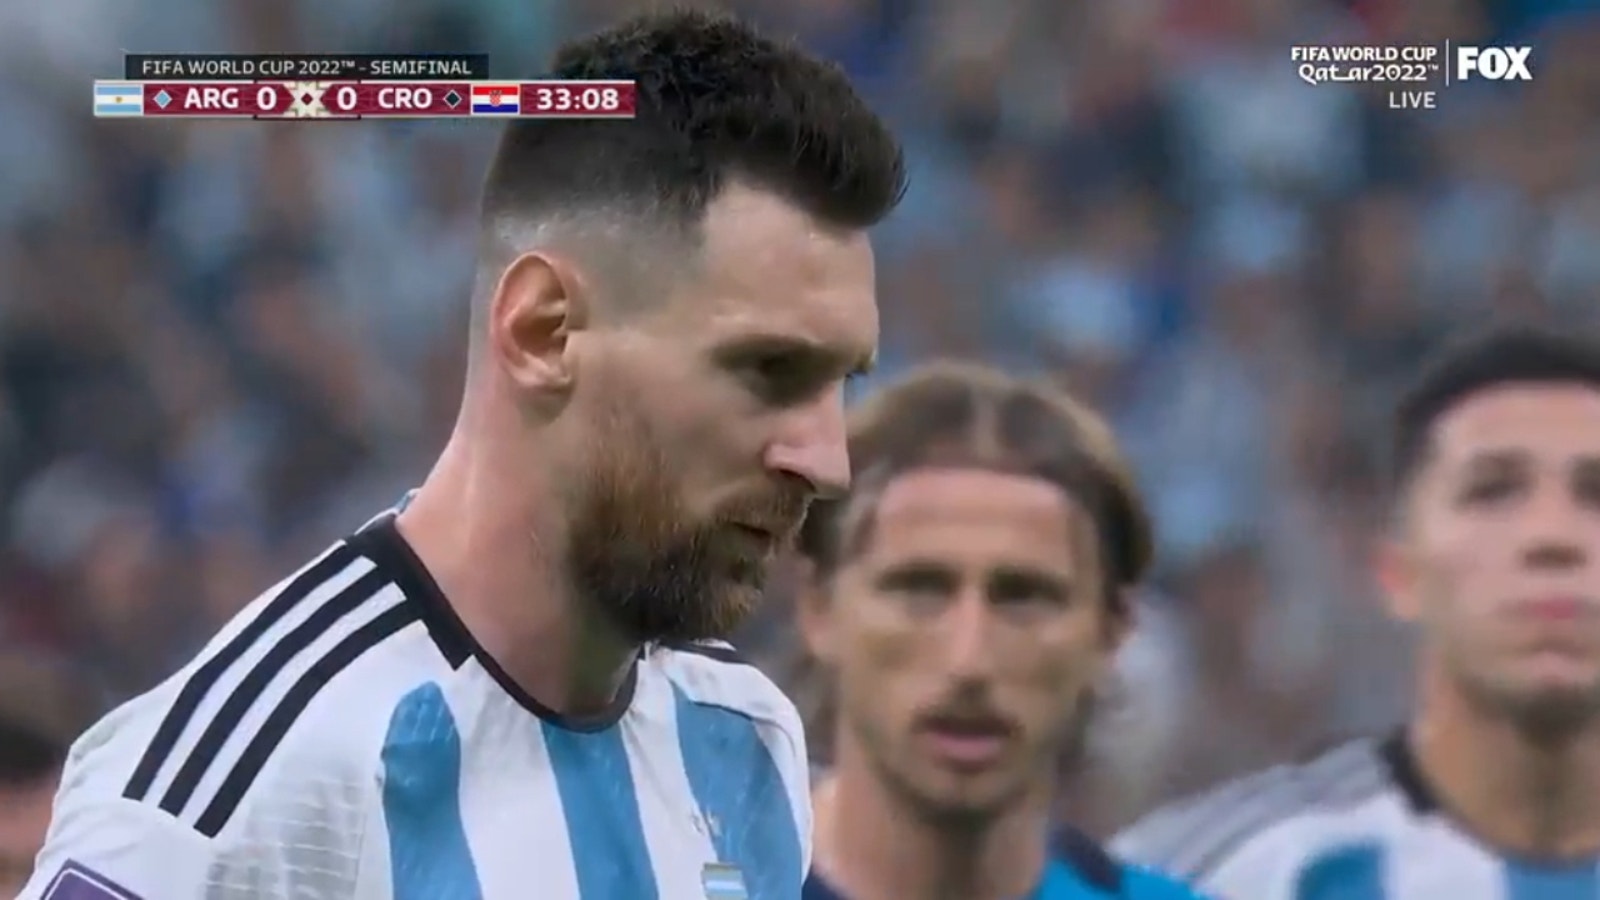 Lionel Messi scores off a penalty kick for 1-0 lead